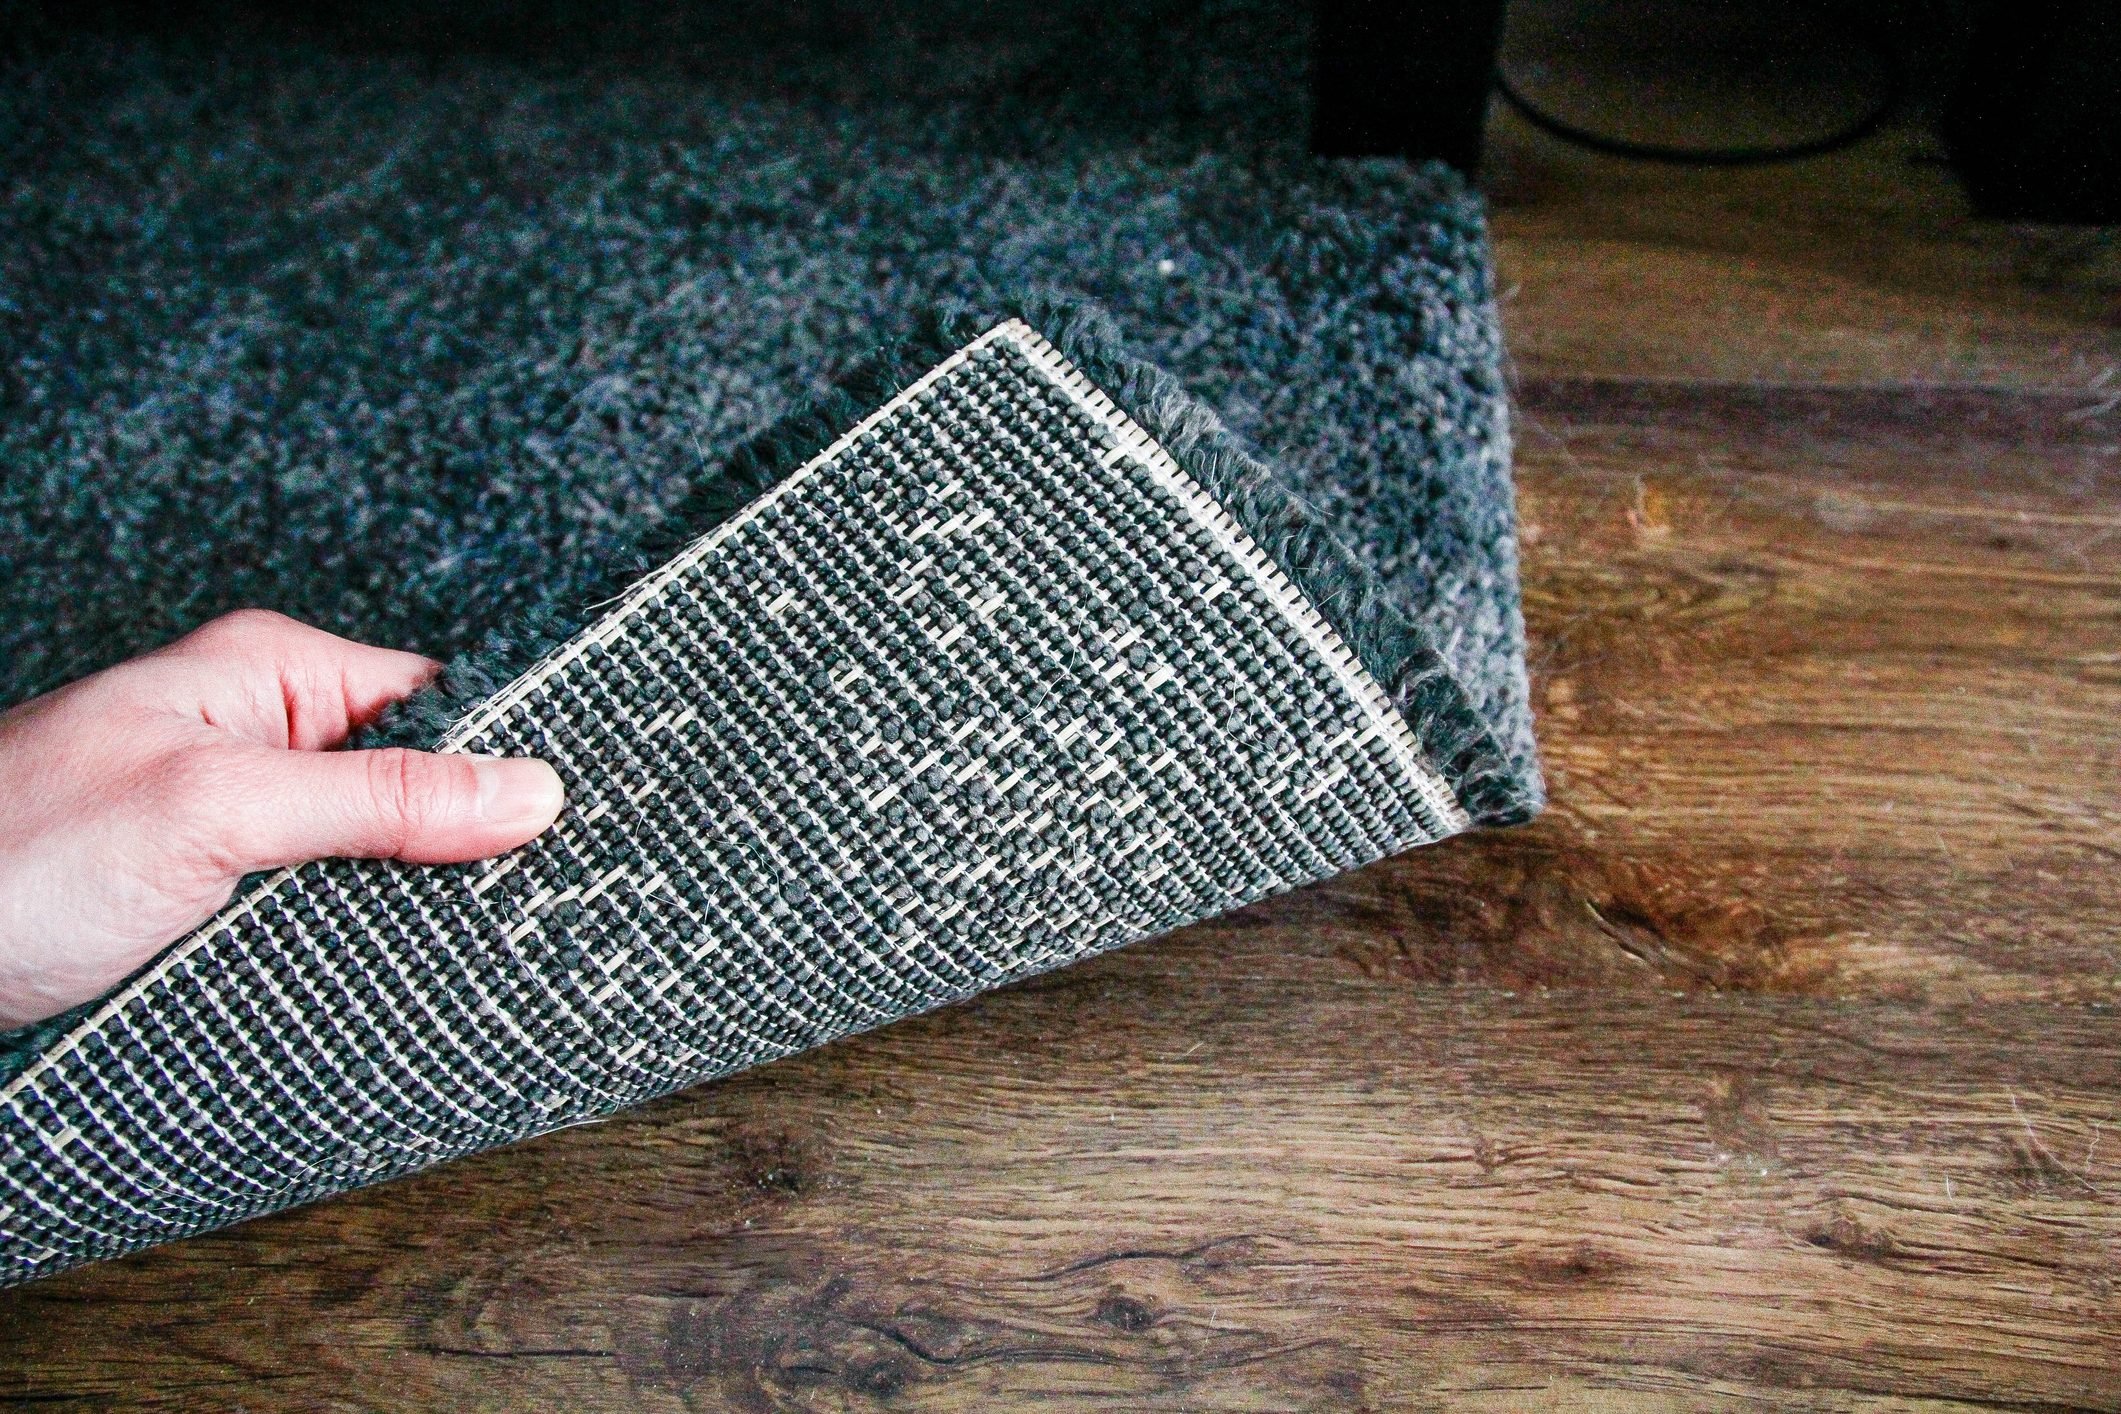 How to Flatten a Rug That Has Been Folded